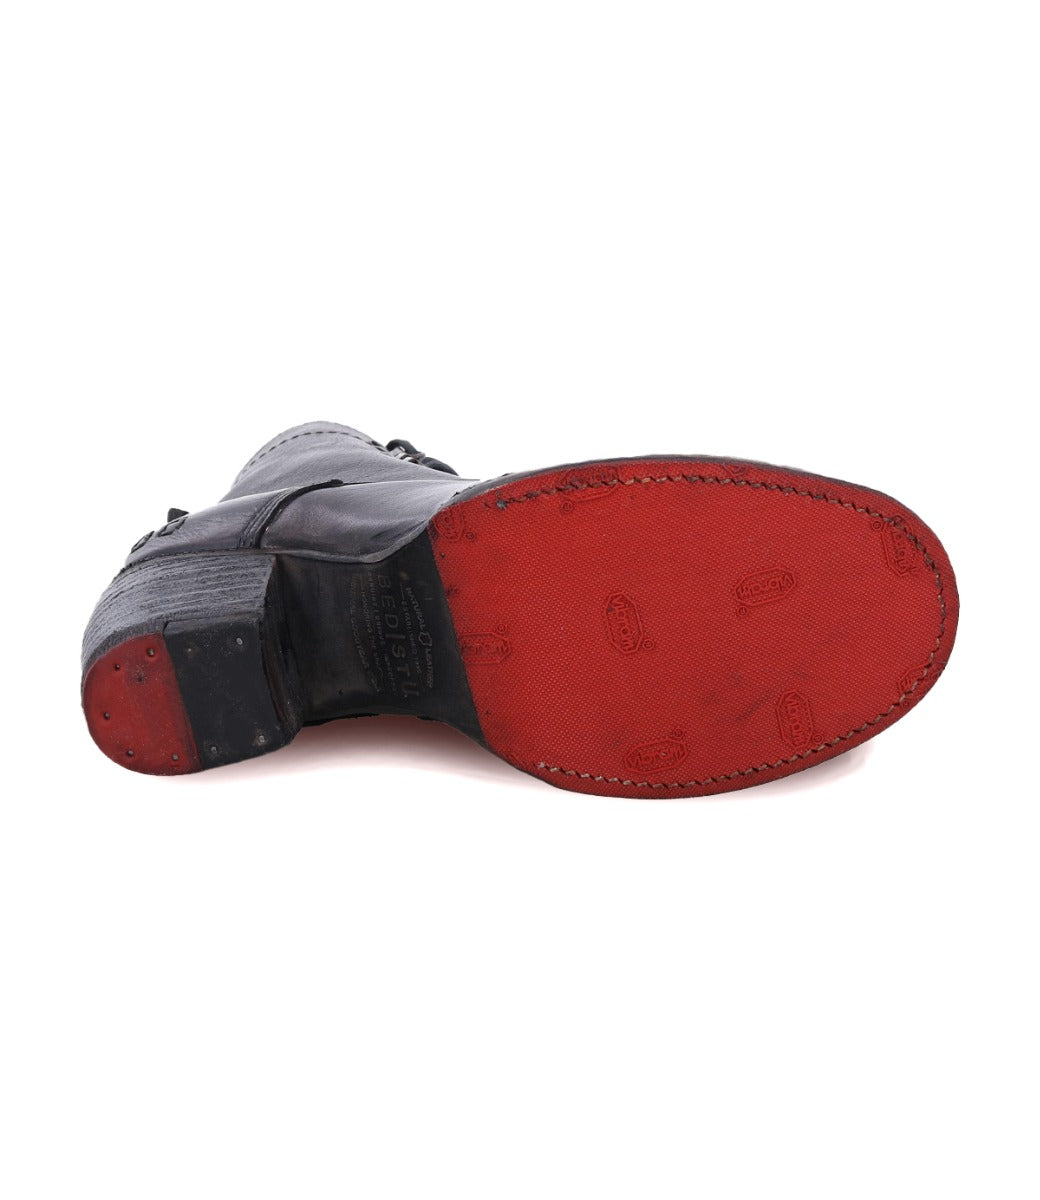 A pair of Bed Stu Judgement black shoes with red soles on a white background.